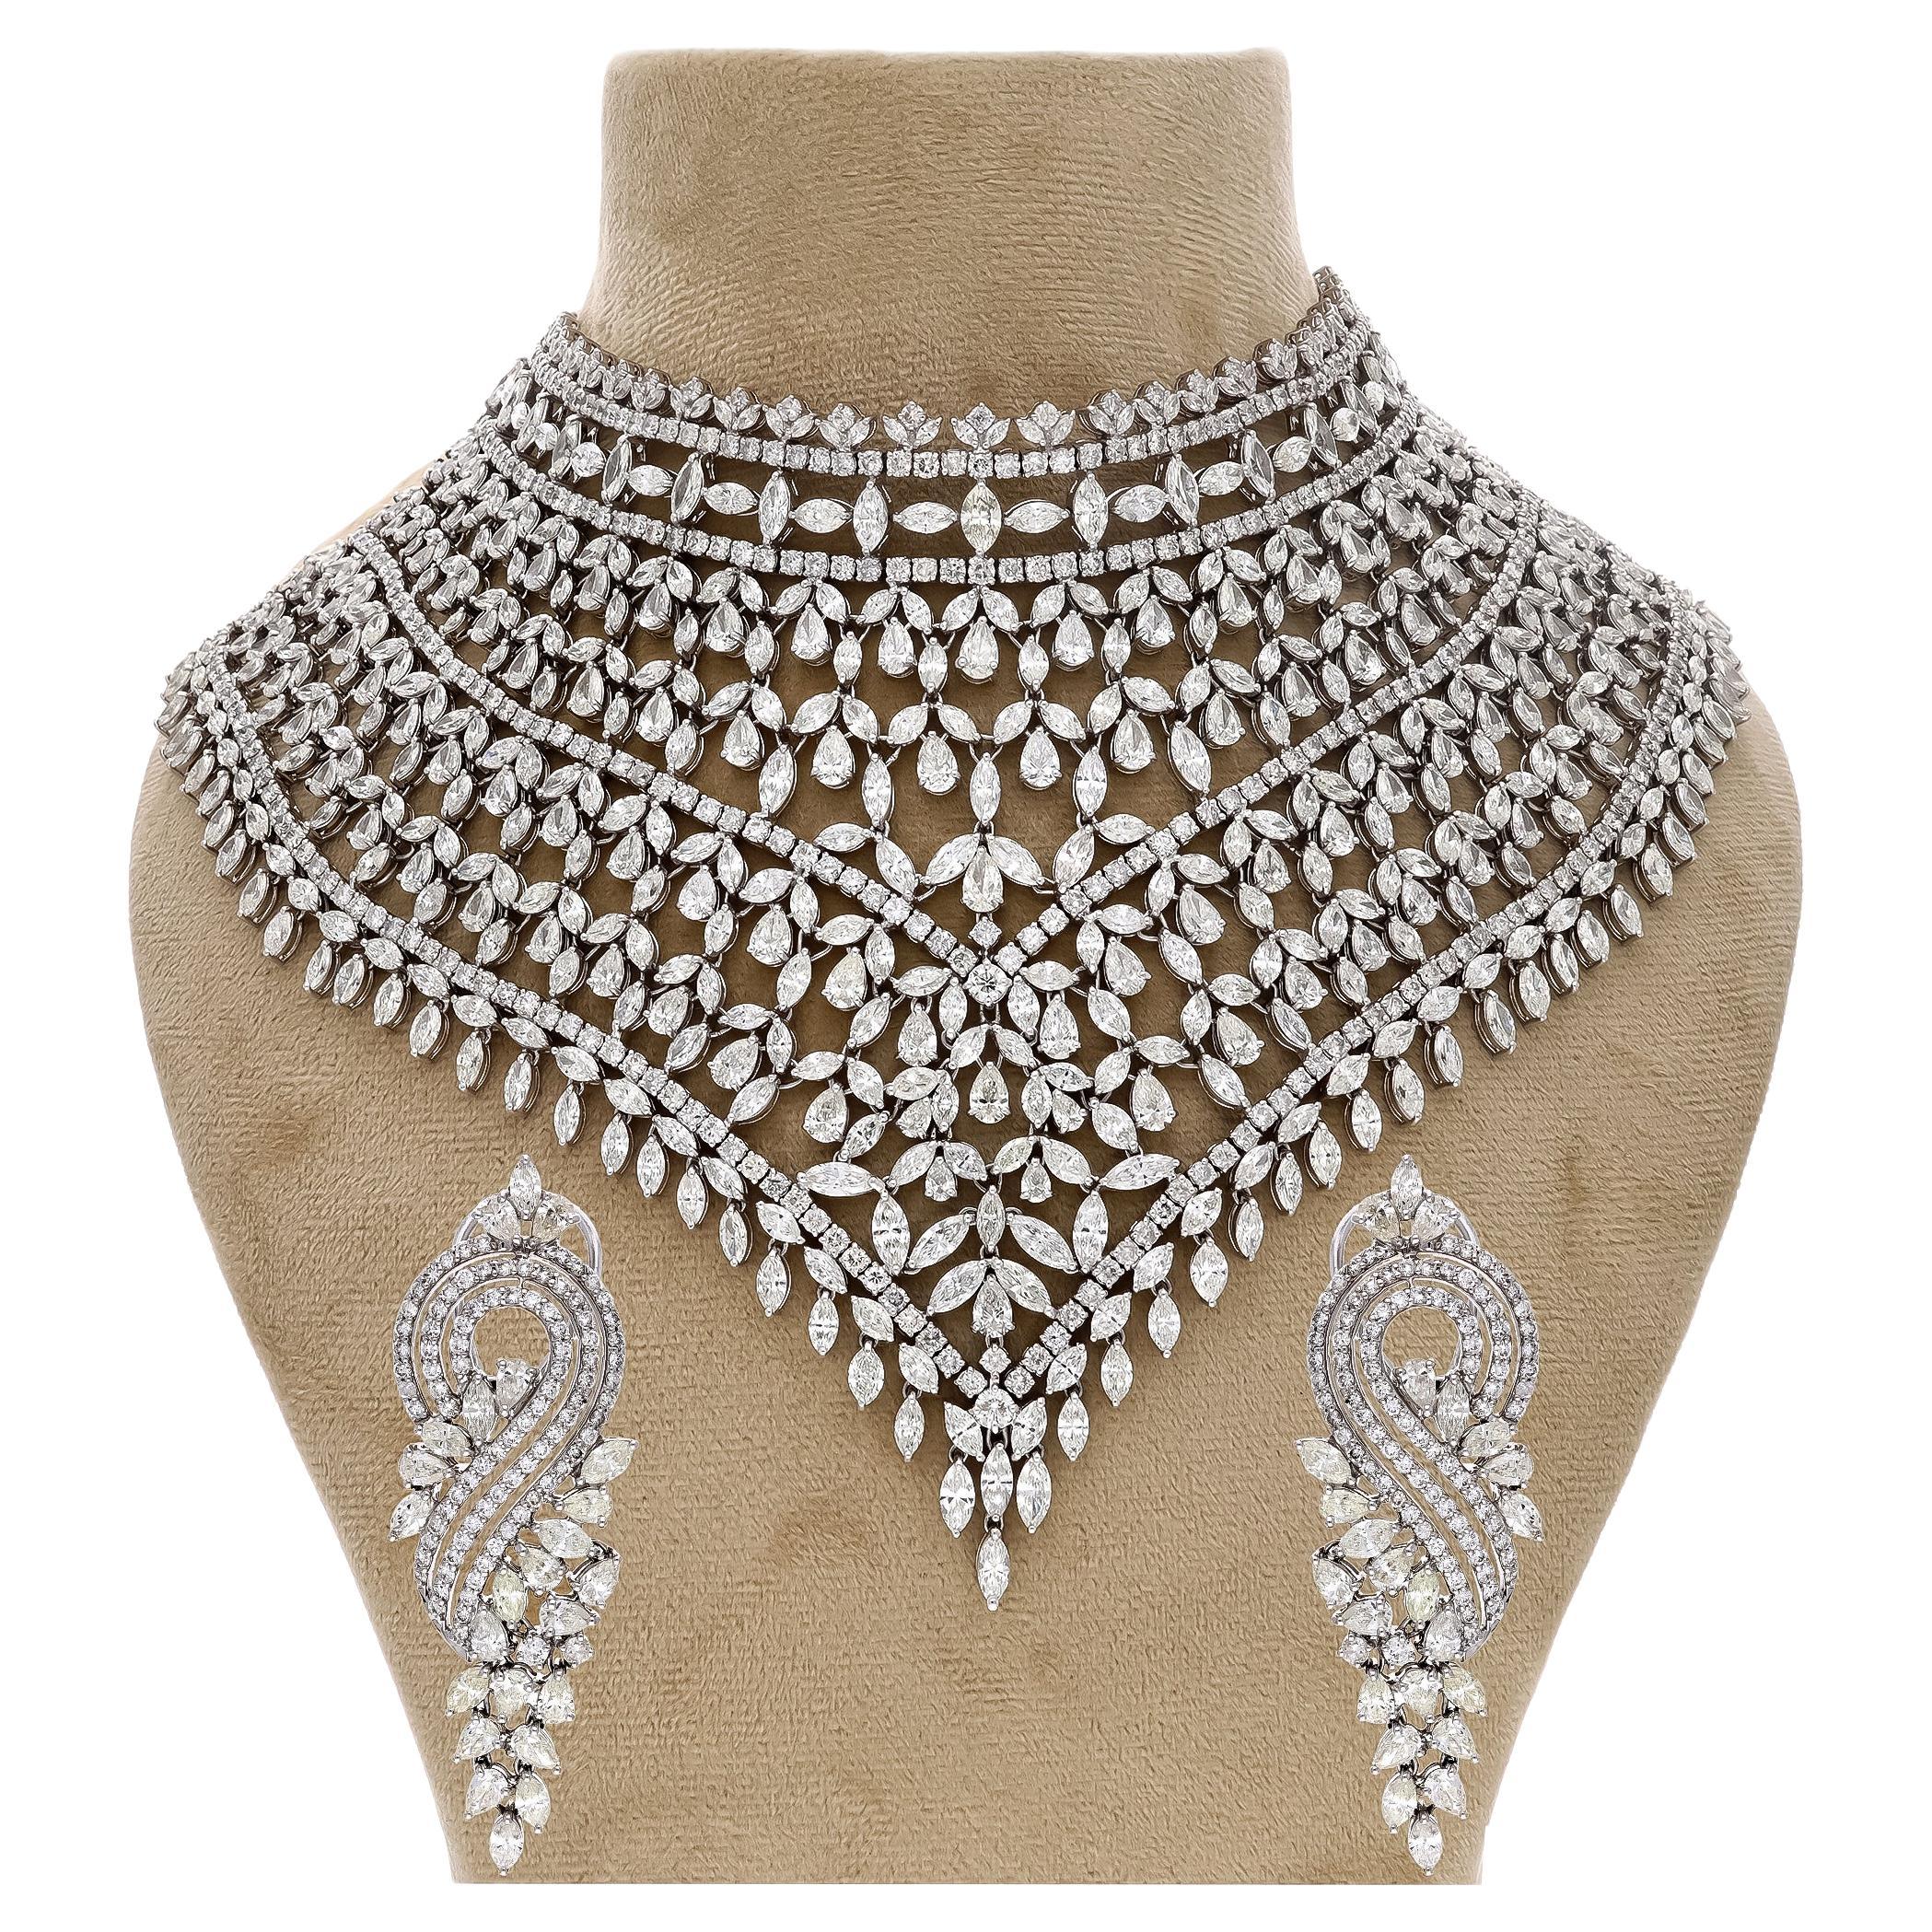 It is a masterpiece of jewelry craftsmanship—a necklace that exudes sheer opulence and elegance. This extraordinary creation boasts a captivating ensemble of pear-shaped and  round brilliant-cut Diamonds  . Collectively, they shimmer with an